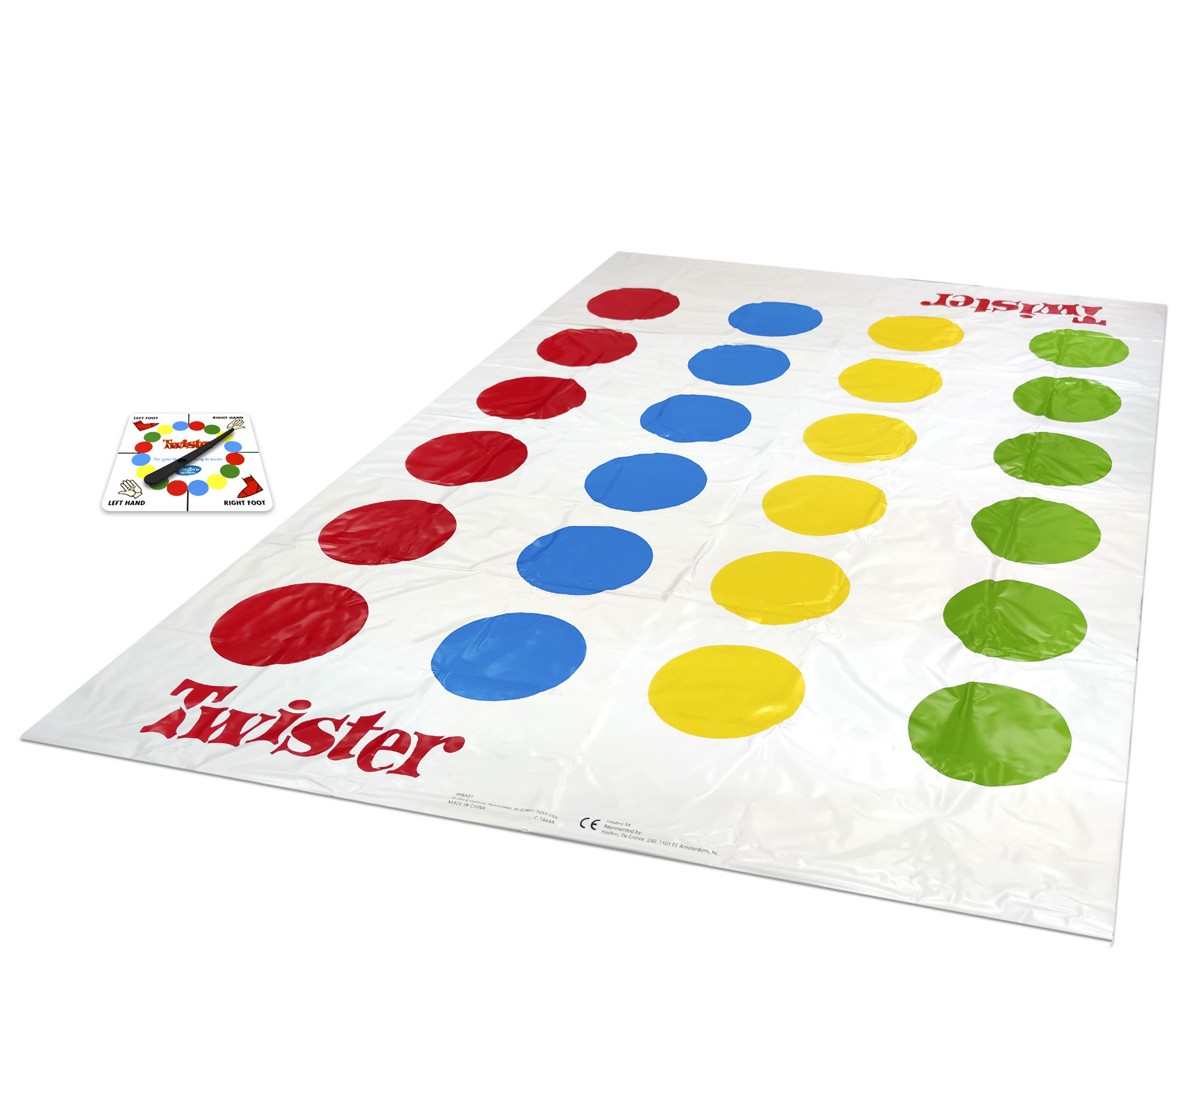 Hasbro Twister Party Game For Family and Friends for Kids 4Y+, Multicolour